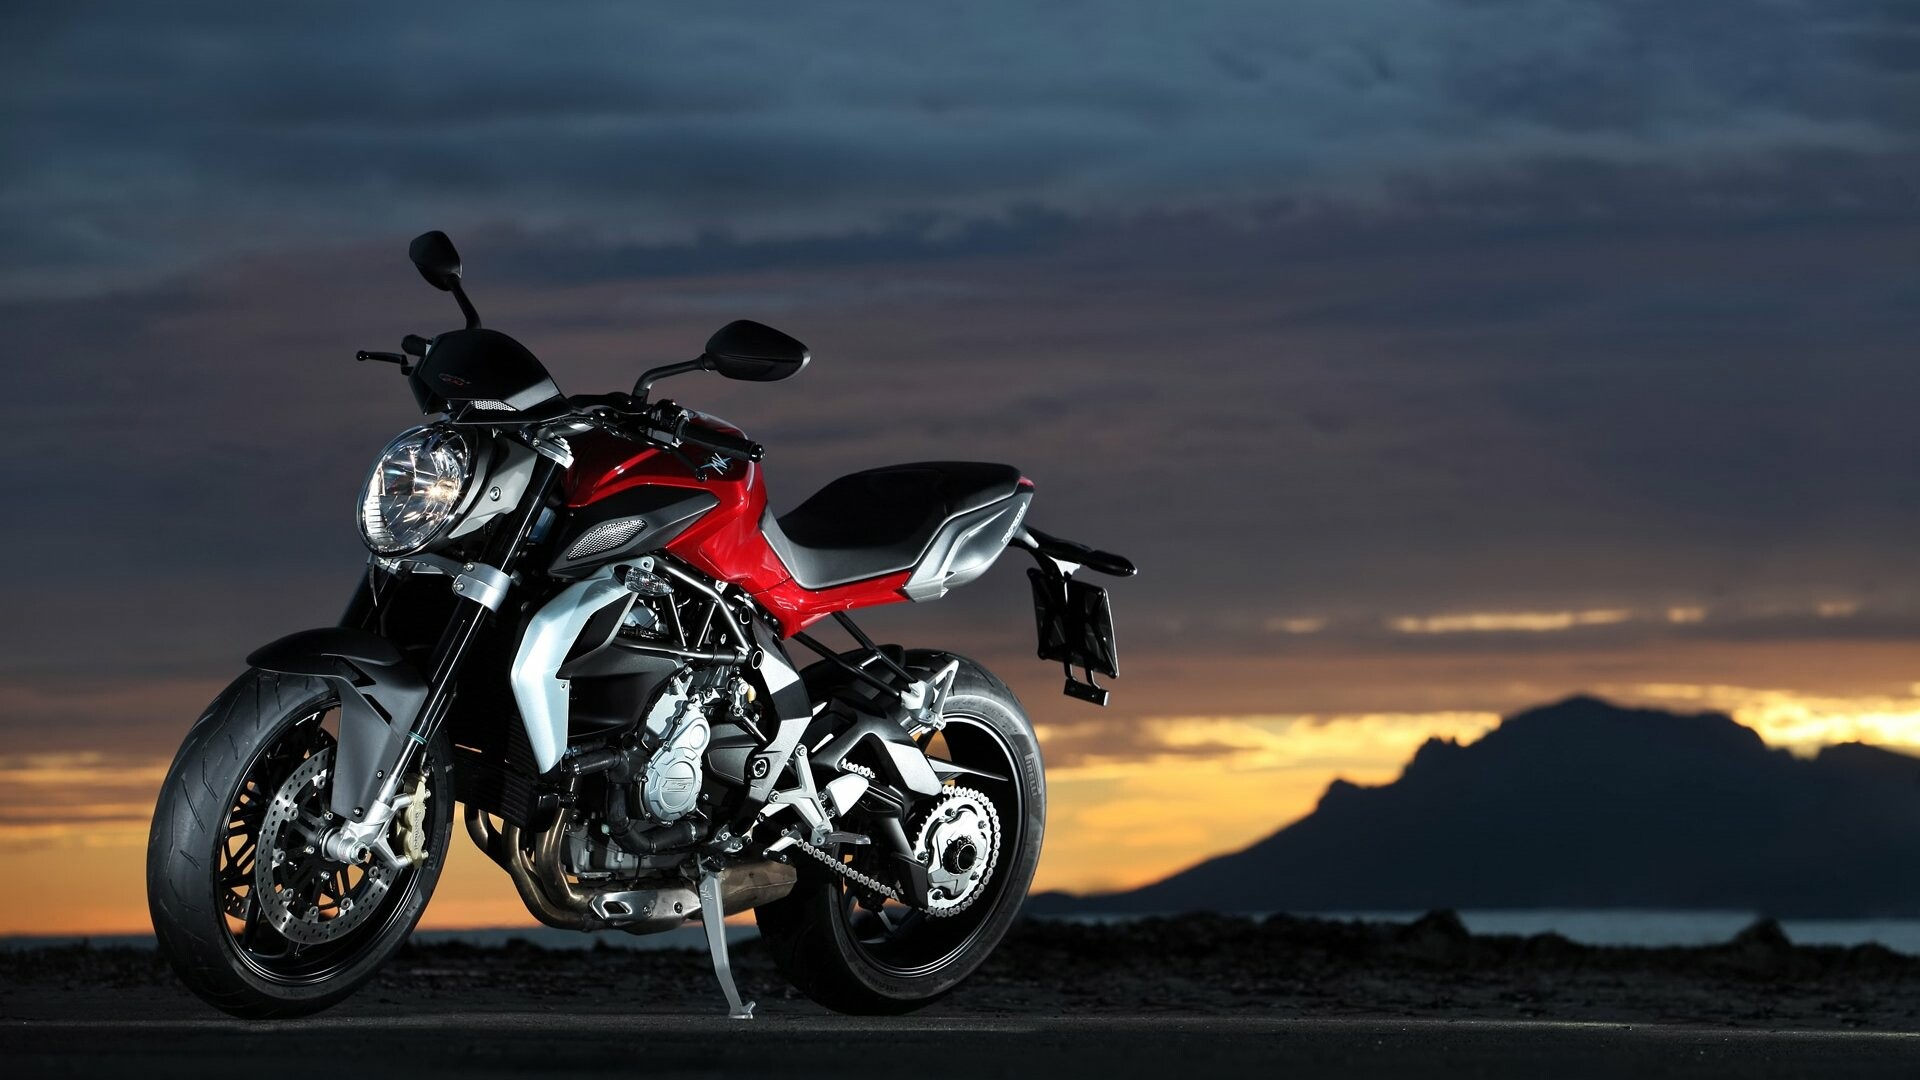 MV Agusta: Brutale, Uses cast wheels and an aggressive riding position. 1920x1080 Full HD Background.